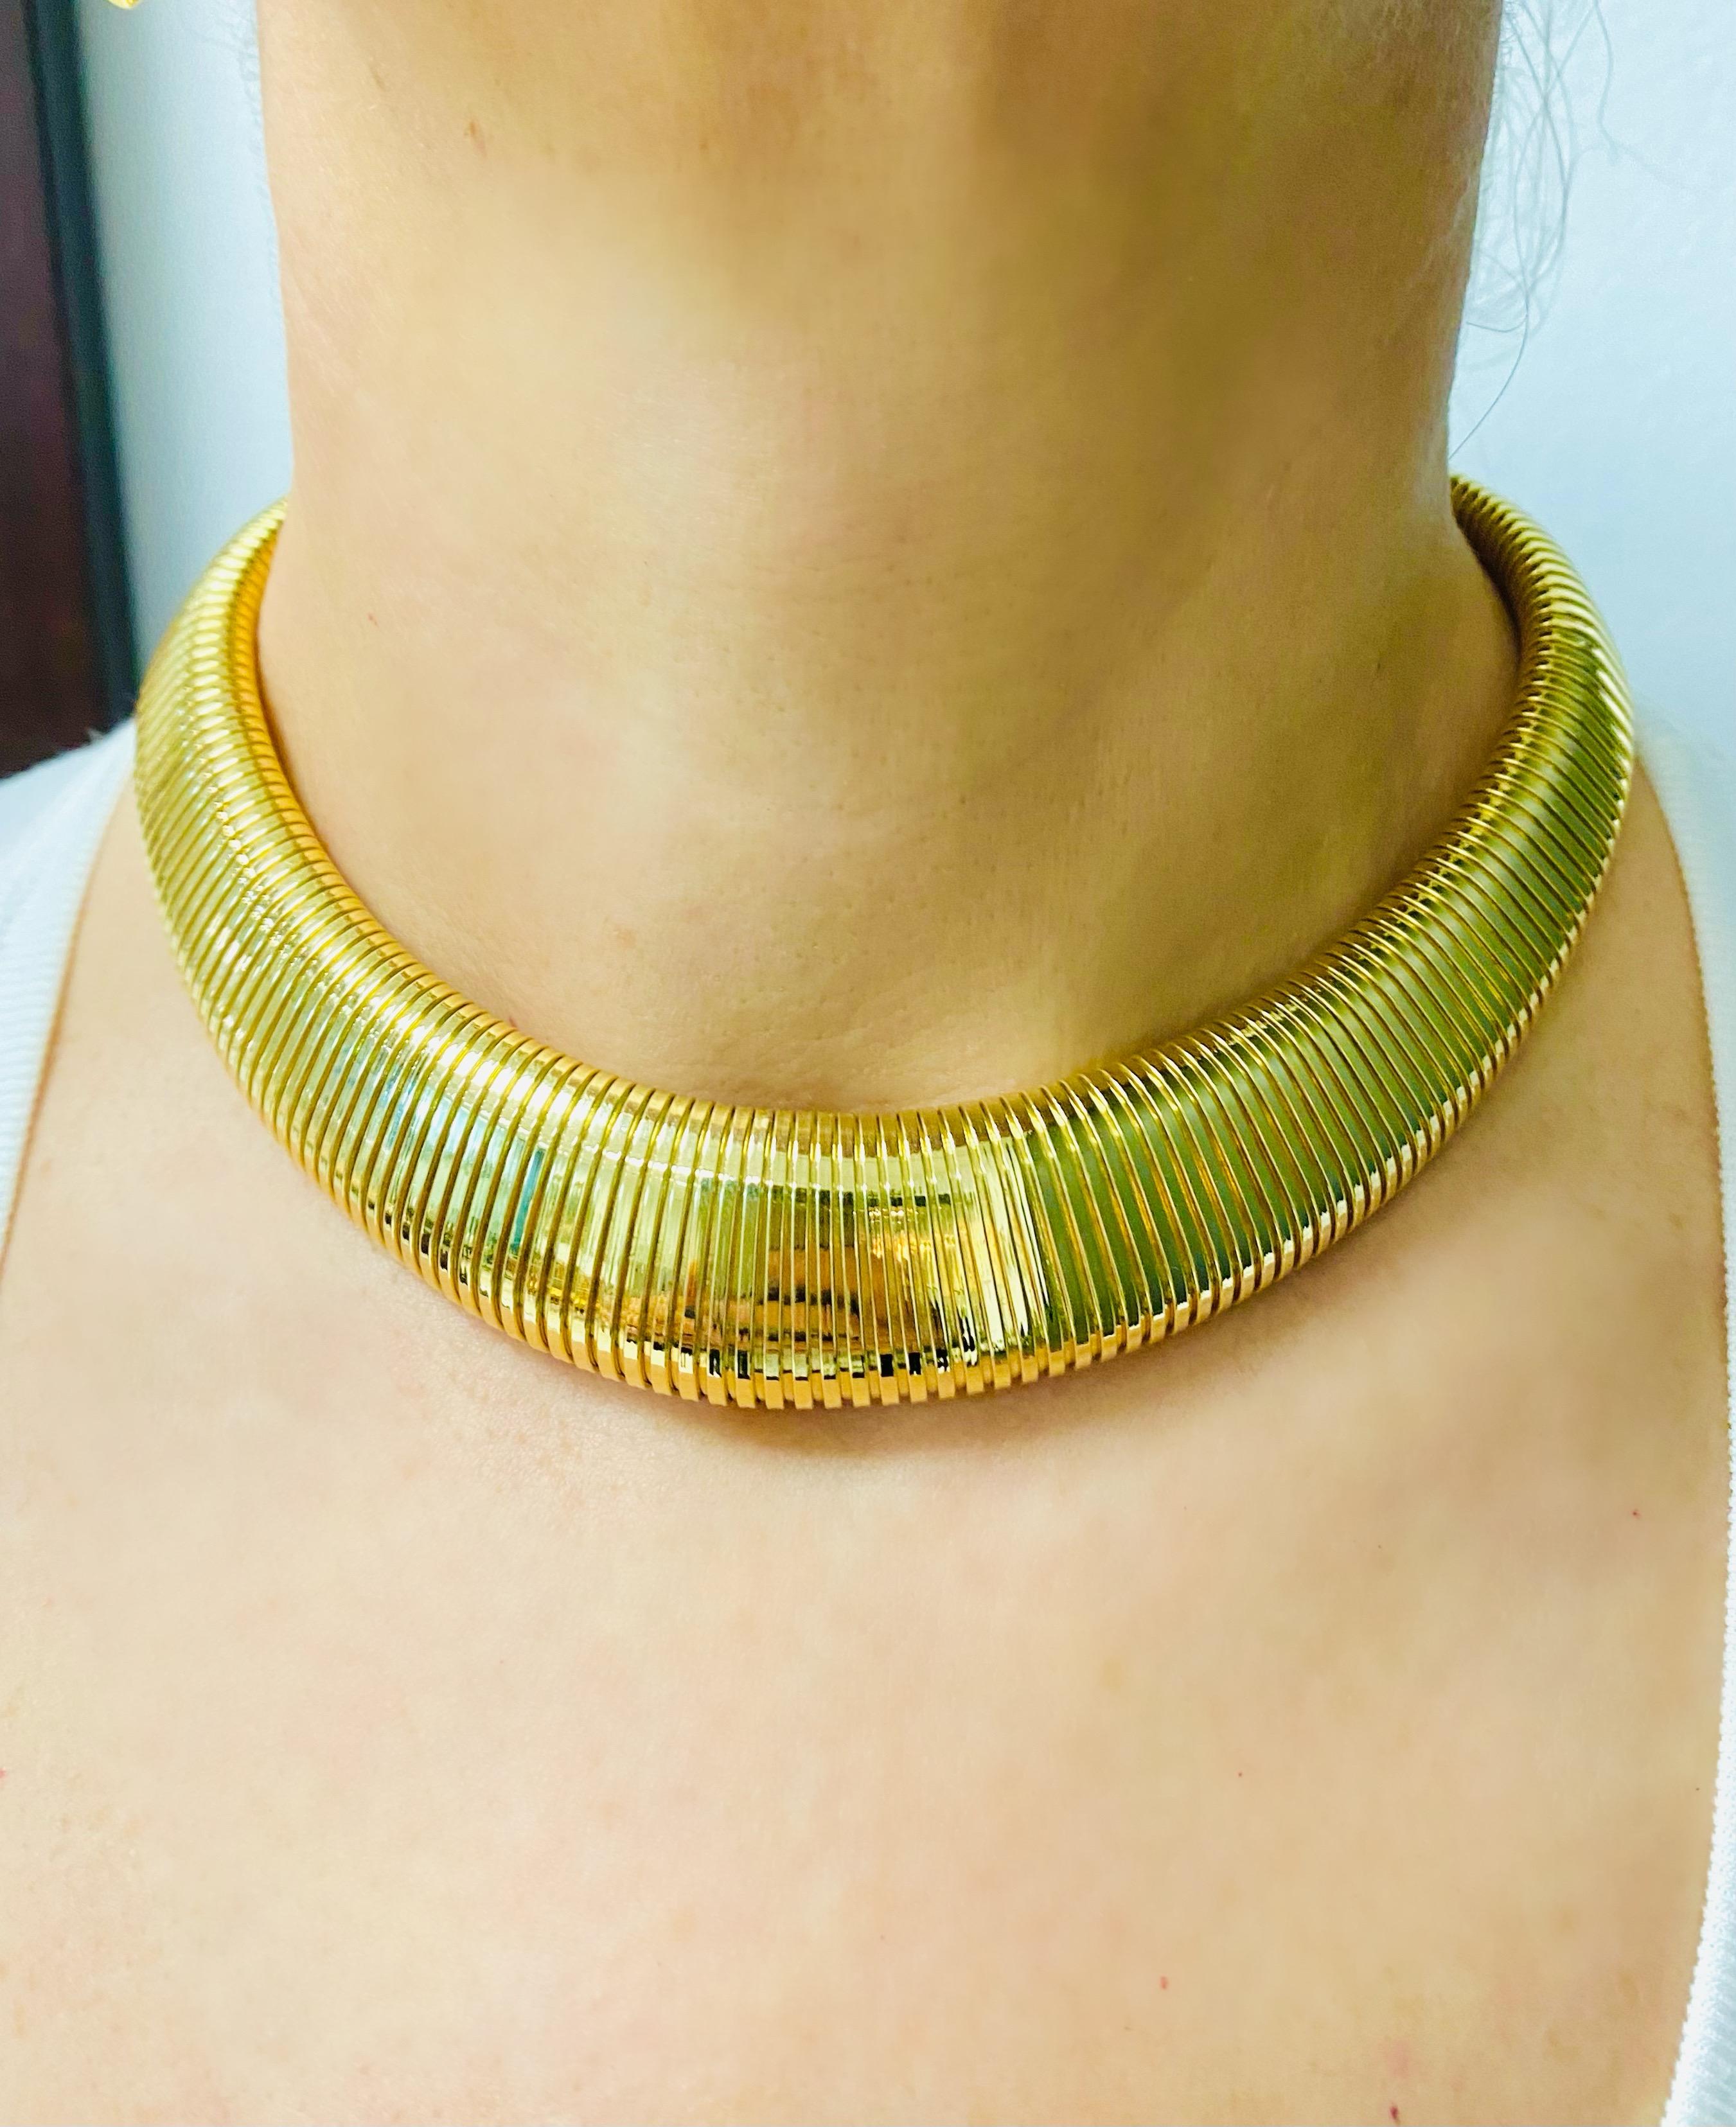 A stunning vintage Tubogas necklace made of 14k gold.
A distinctive aesthetic of Tubogas was obtained from the gas pipes design. Bulgari adopted this look in 1940s with the help of Carlo Weingrill, who contributed his designer’s vision to the cause.